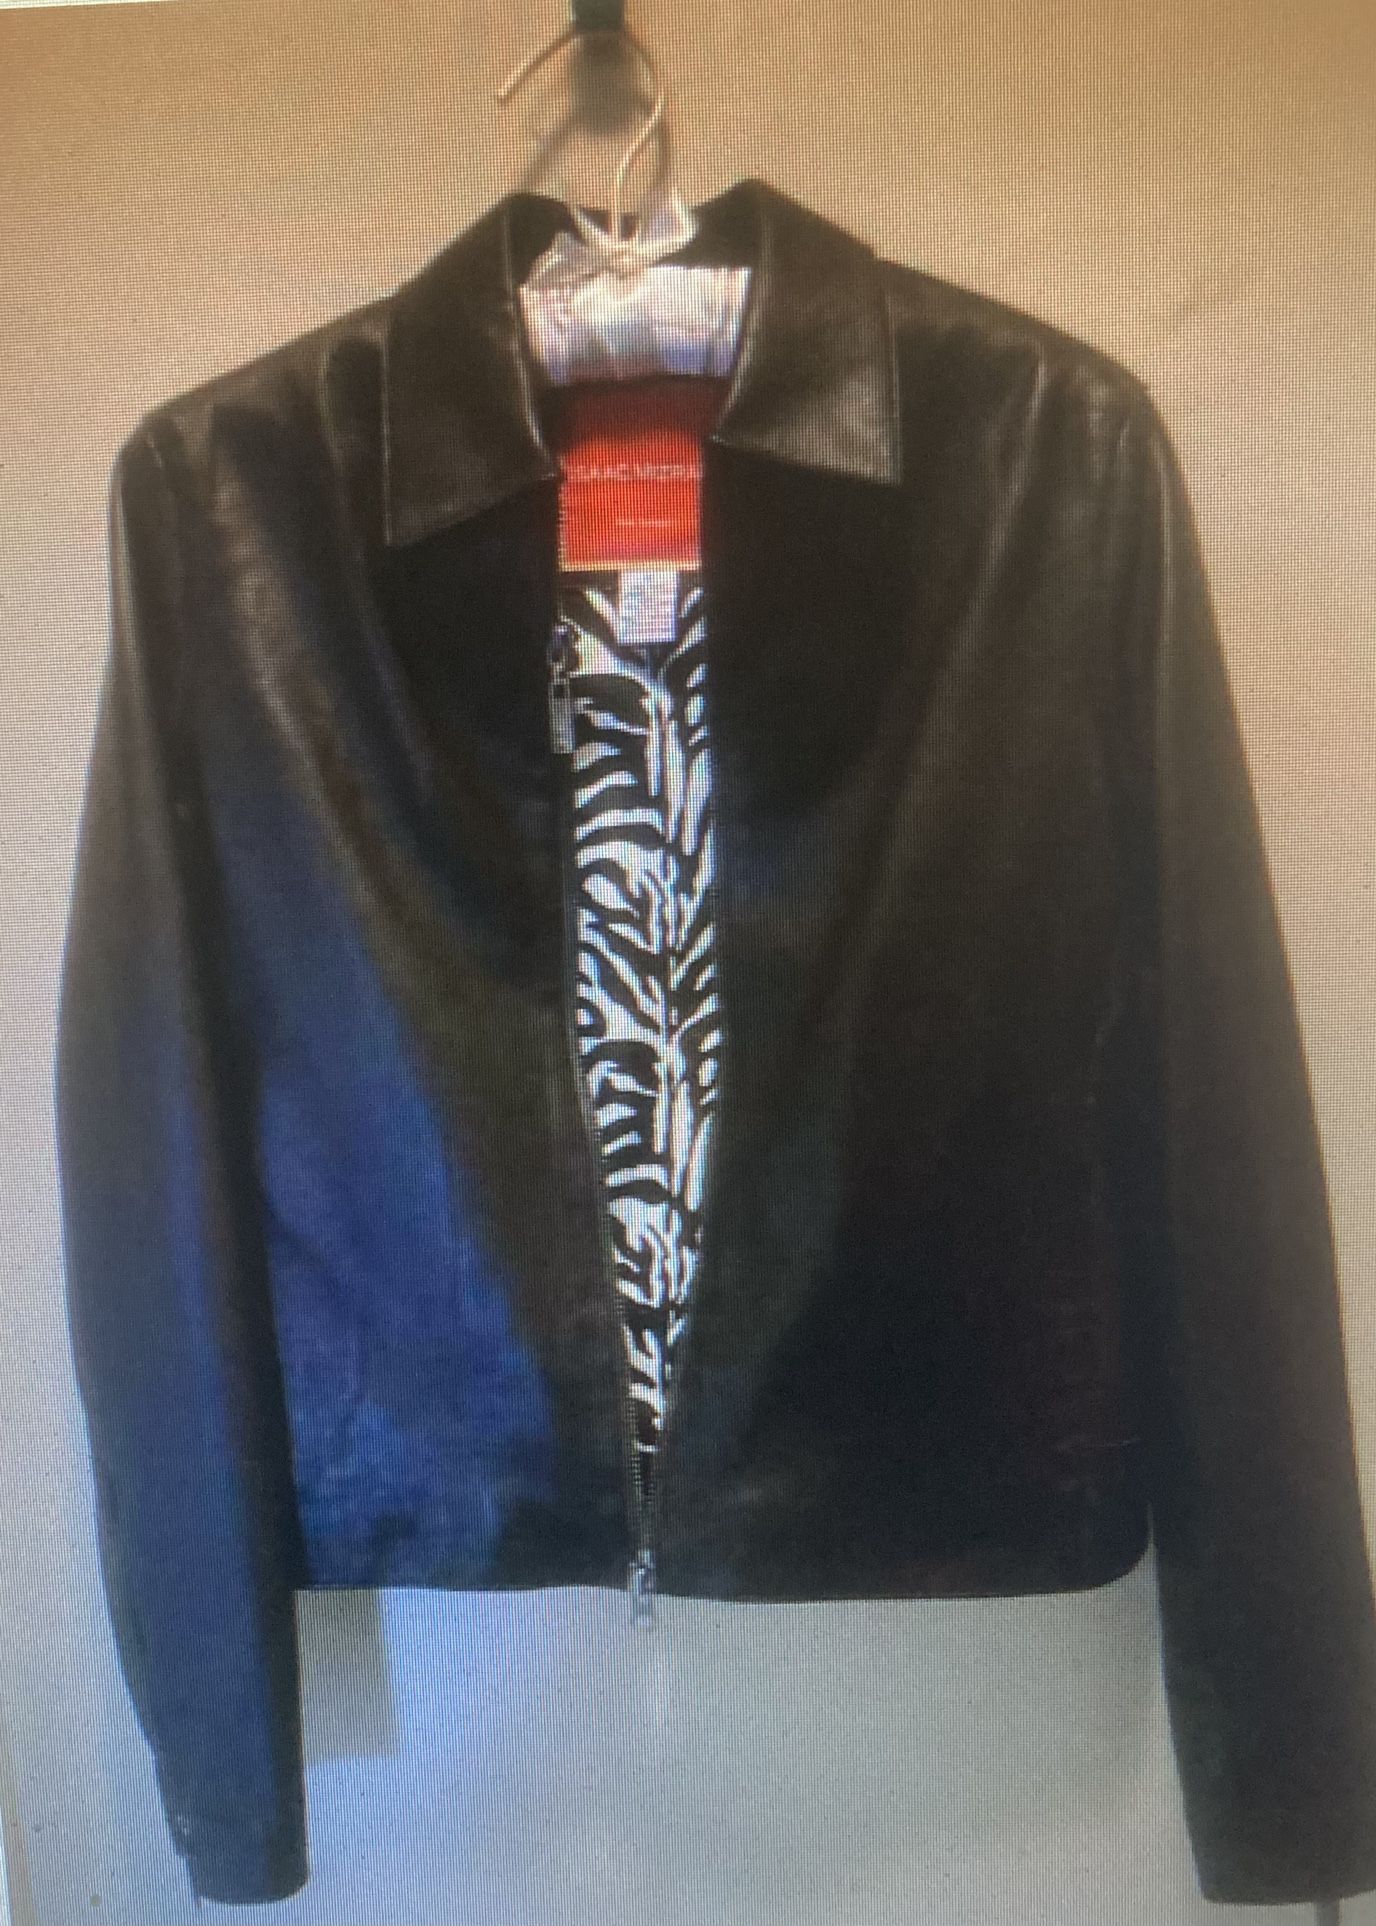 NEW Faux, Leather Zippered Motor Jacket Size S